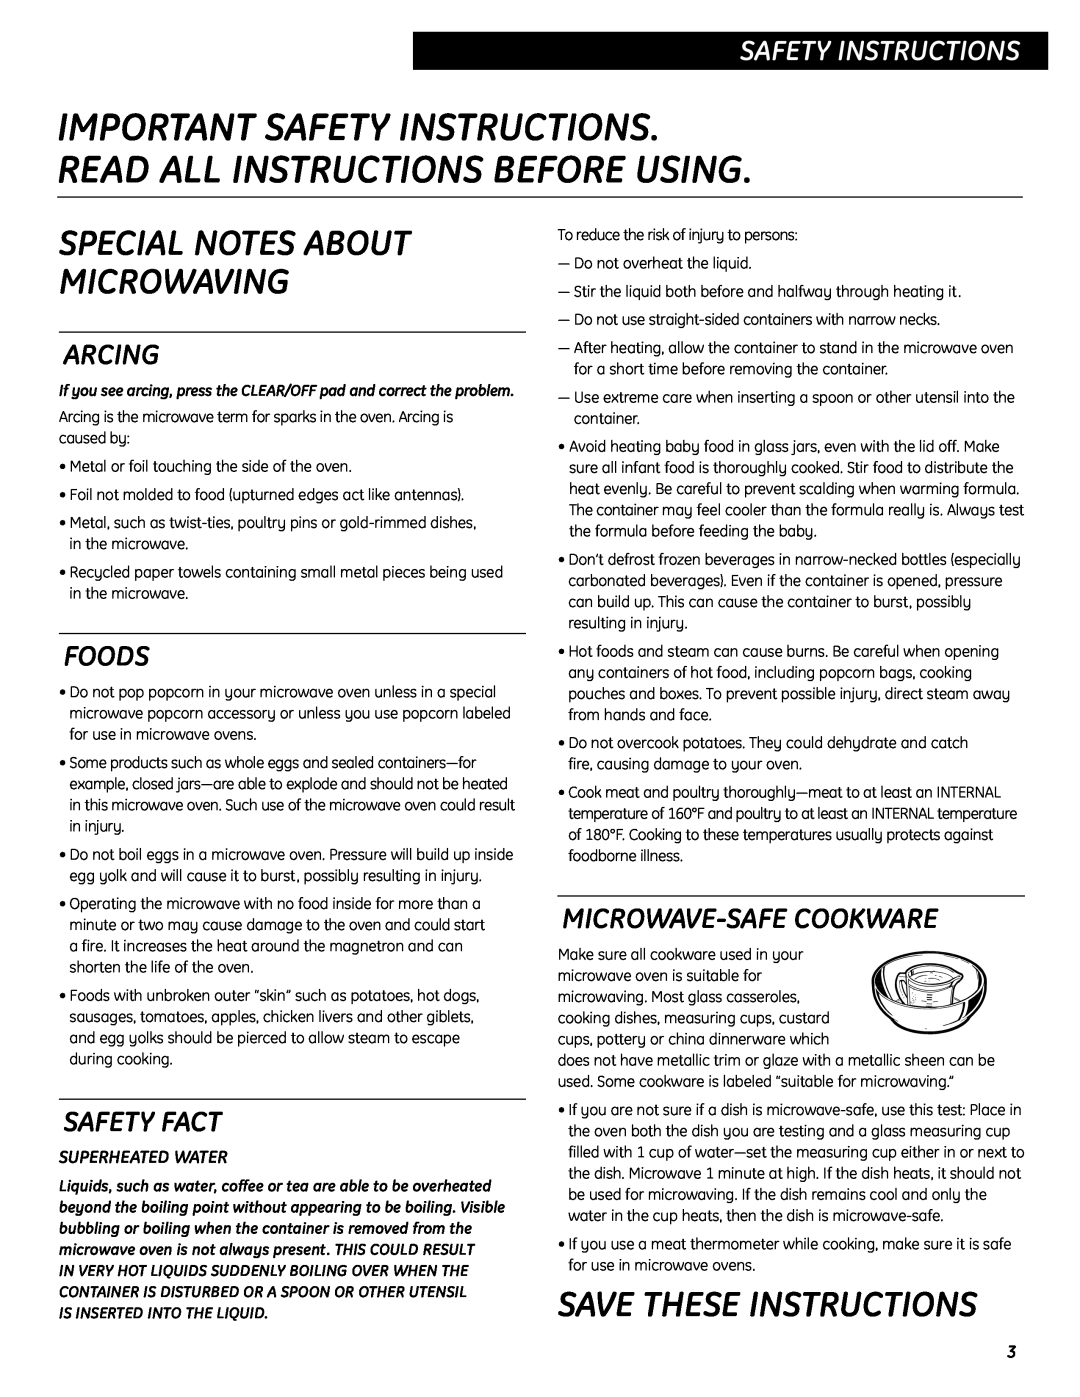 GE WES0930 Important Safety Instructions Read All Instructions Before Using, Special Notes About Microwaving, Arcing 